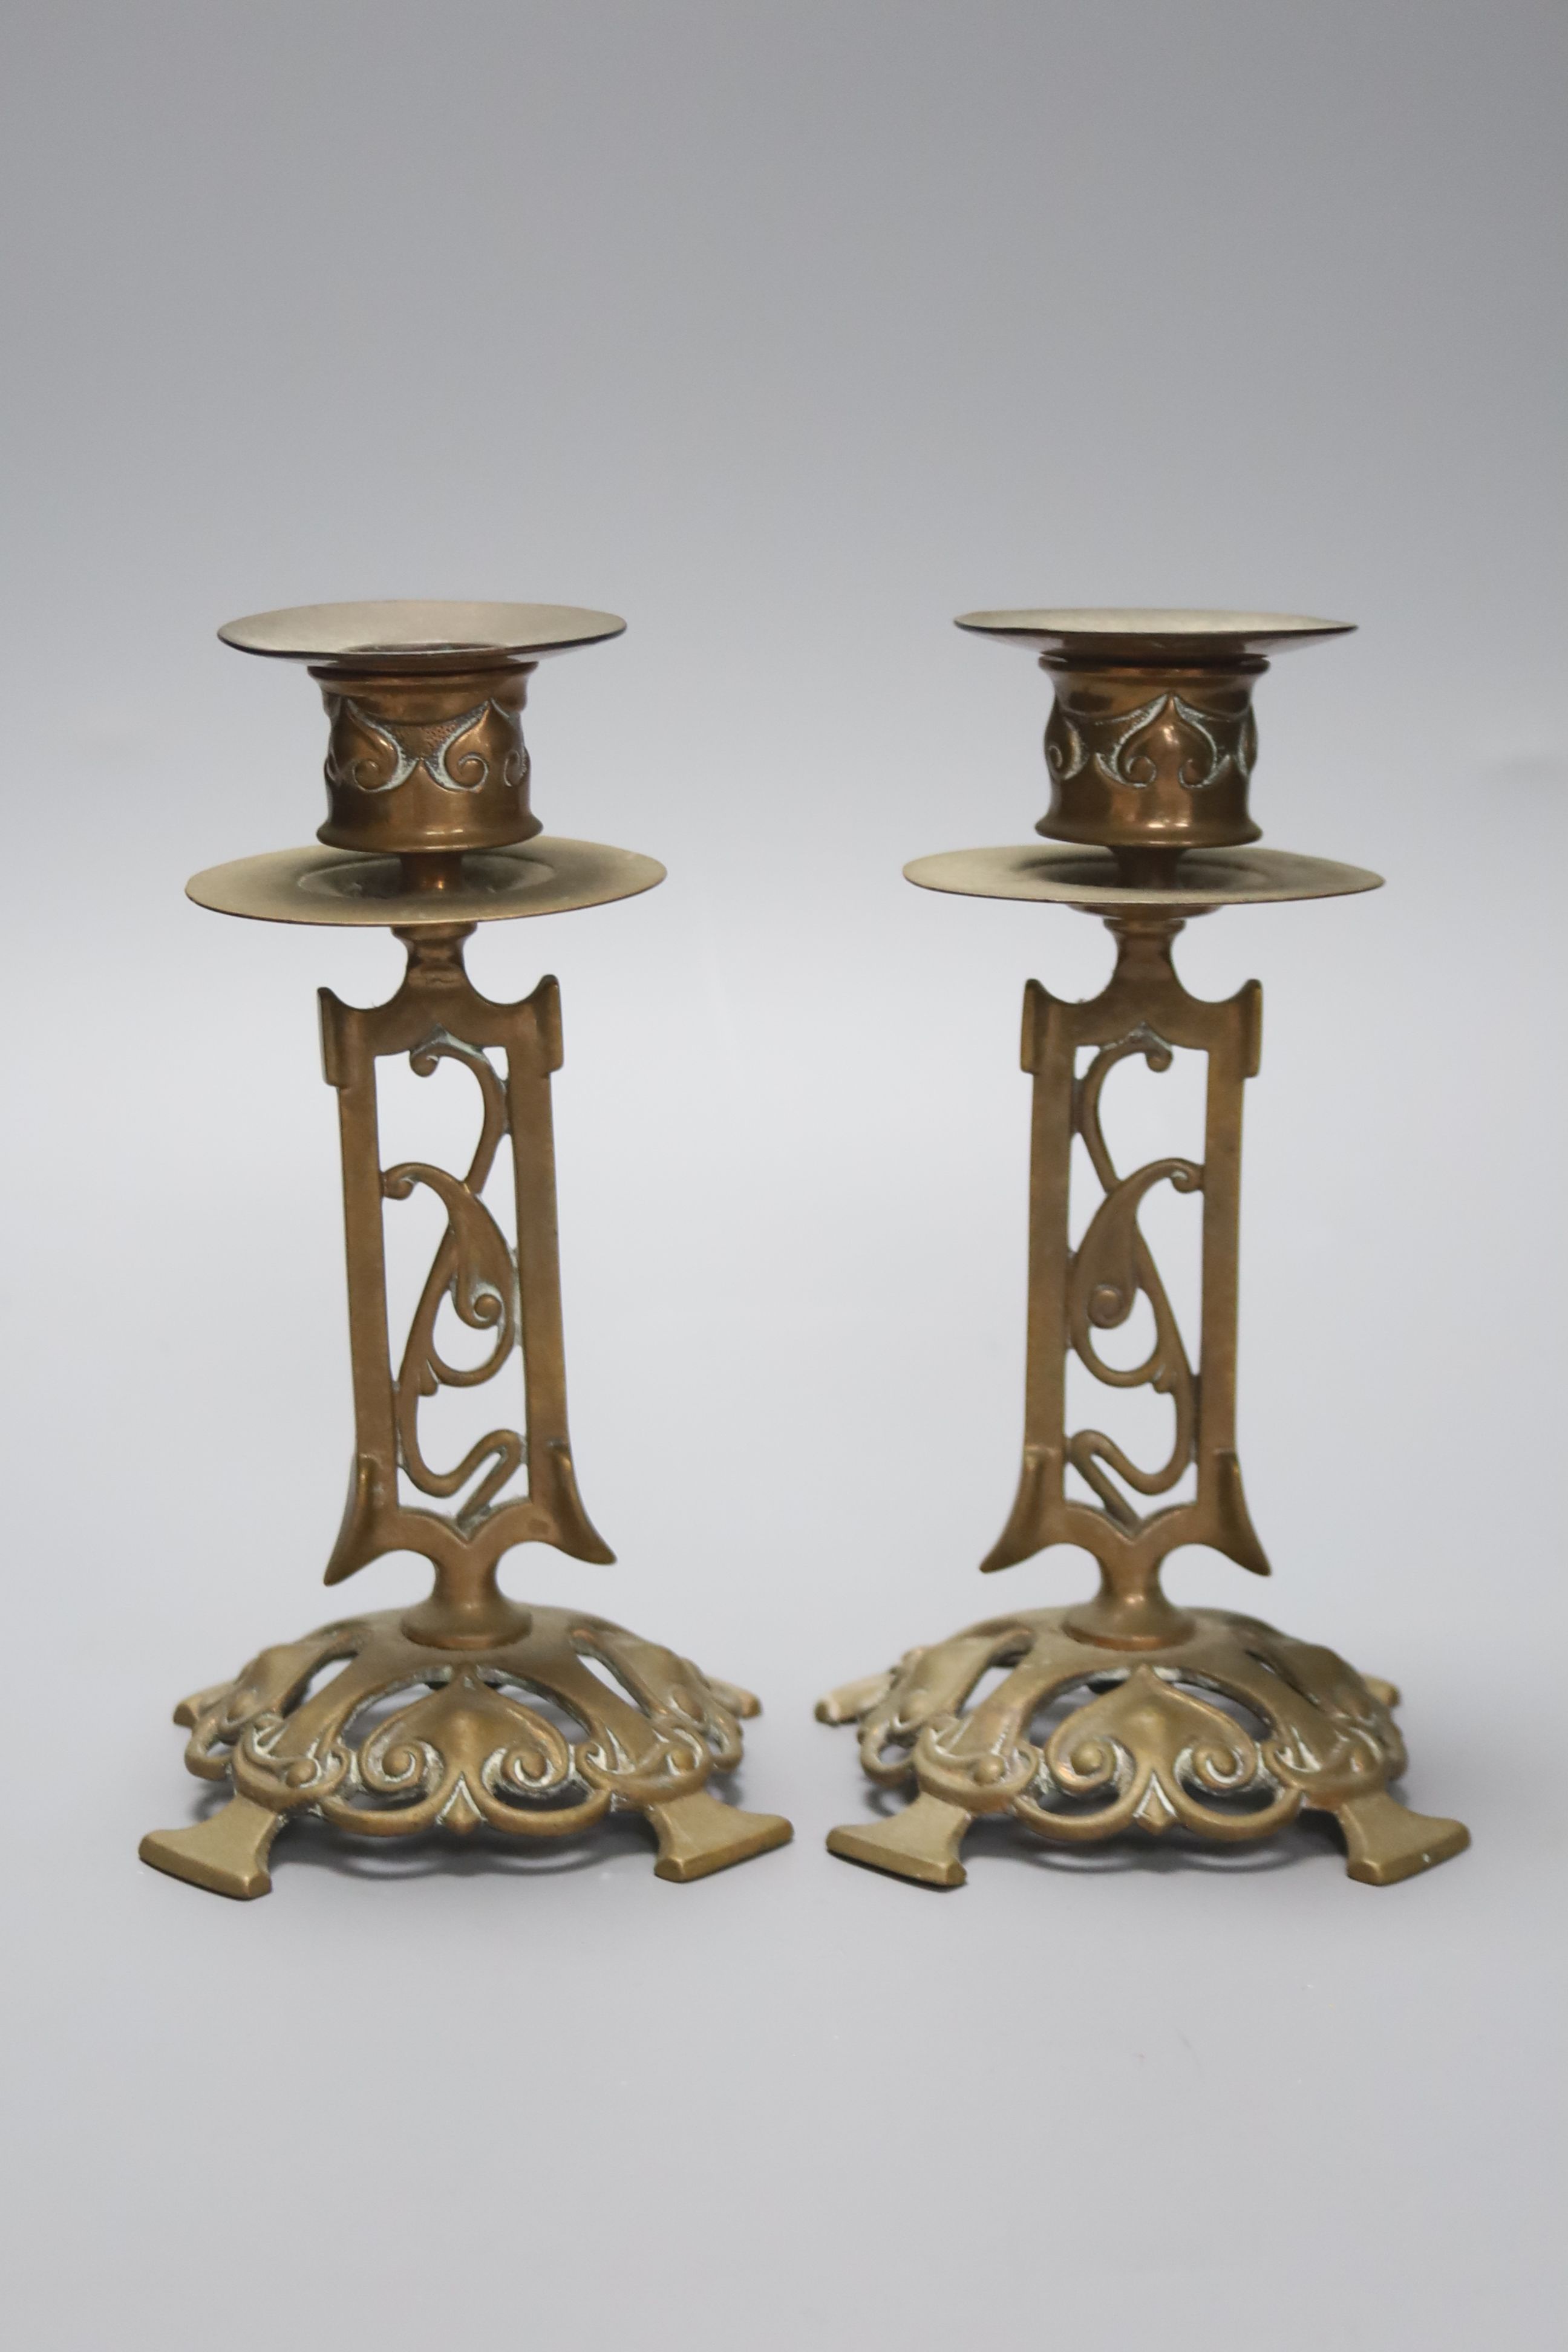 A pair of Art Nouveau candlesticks by William Tonks & Sons, height 18cm